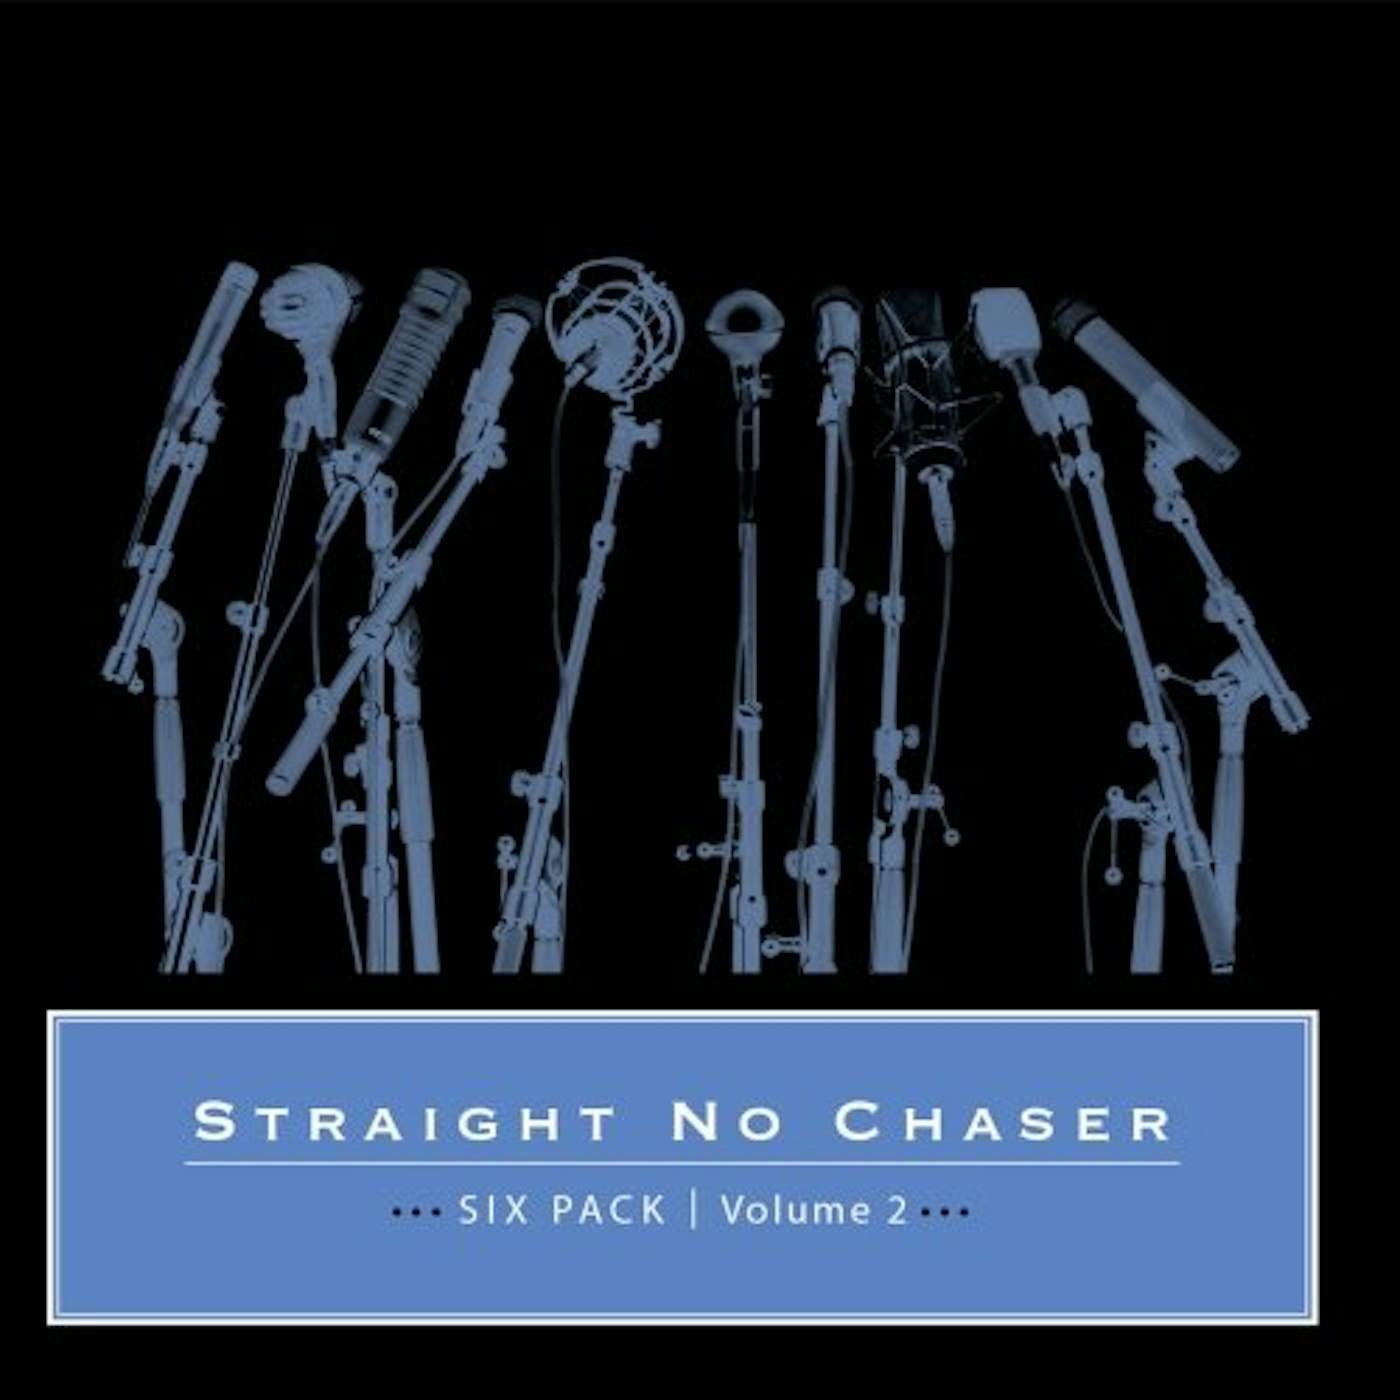 Straight No Chaser SIX PACK 2 CD